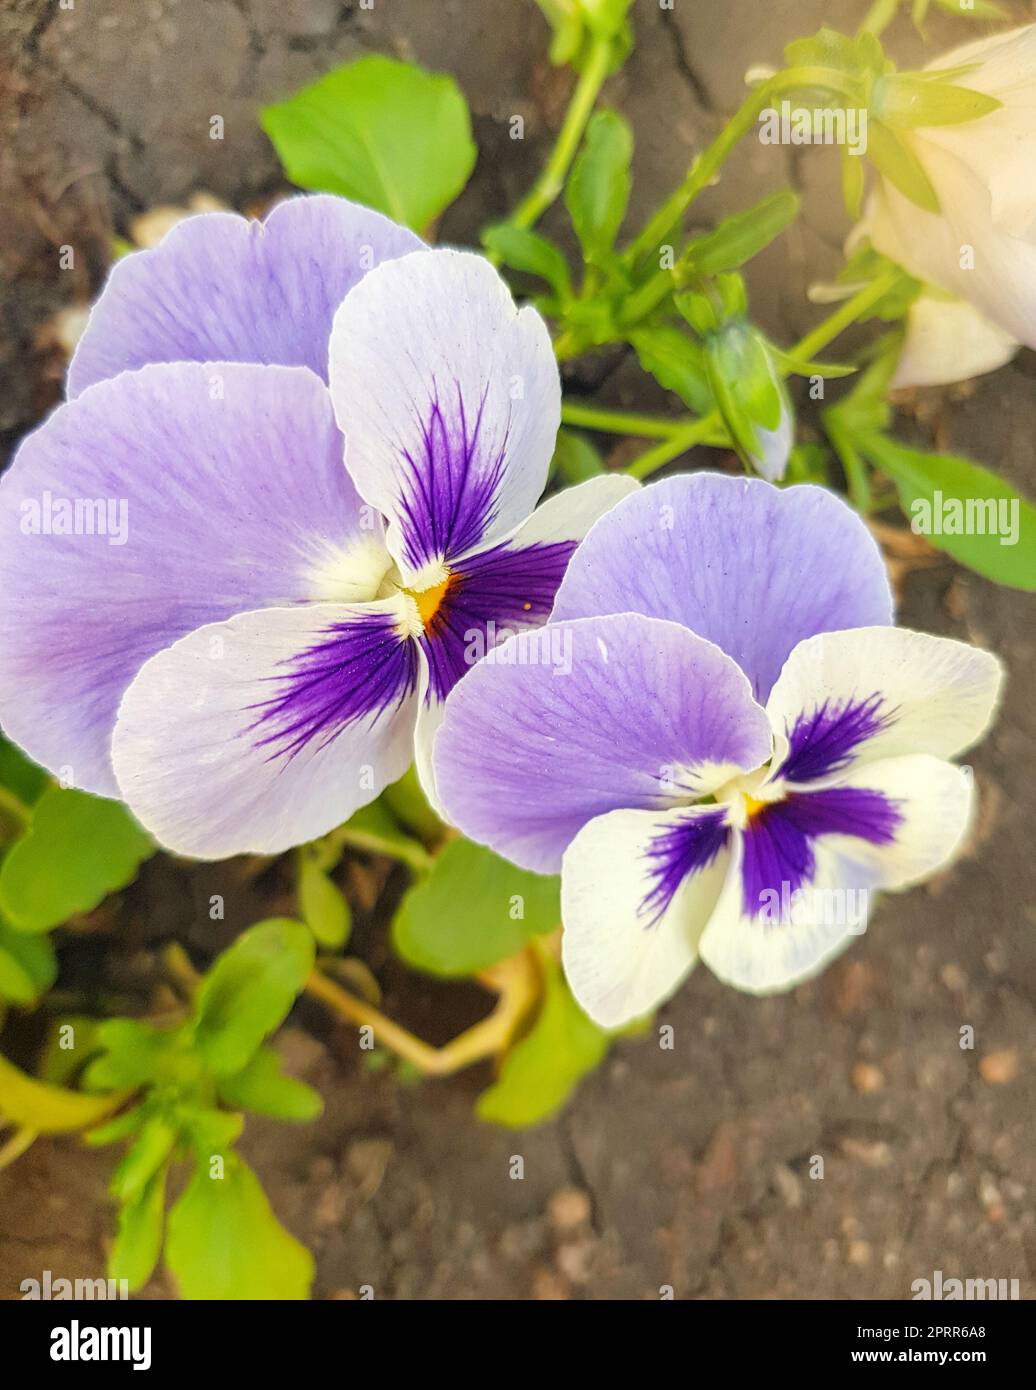 Garden pansies with purple and white petals. Viola tricolor pansies on a flower bed. Stock Photo